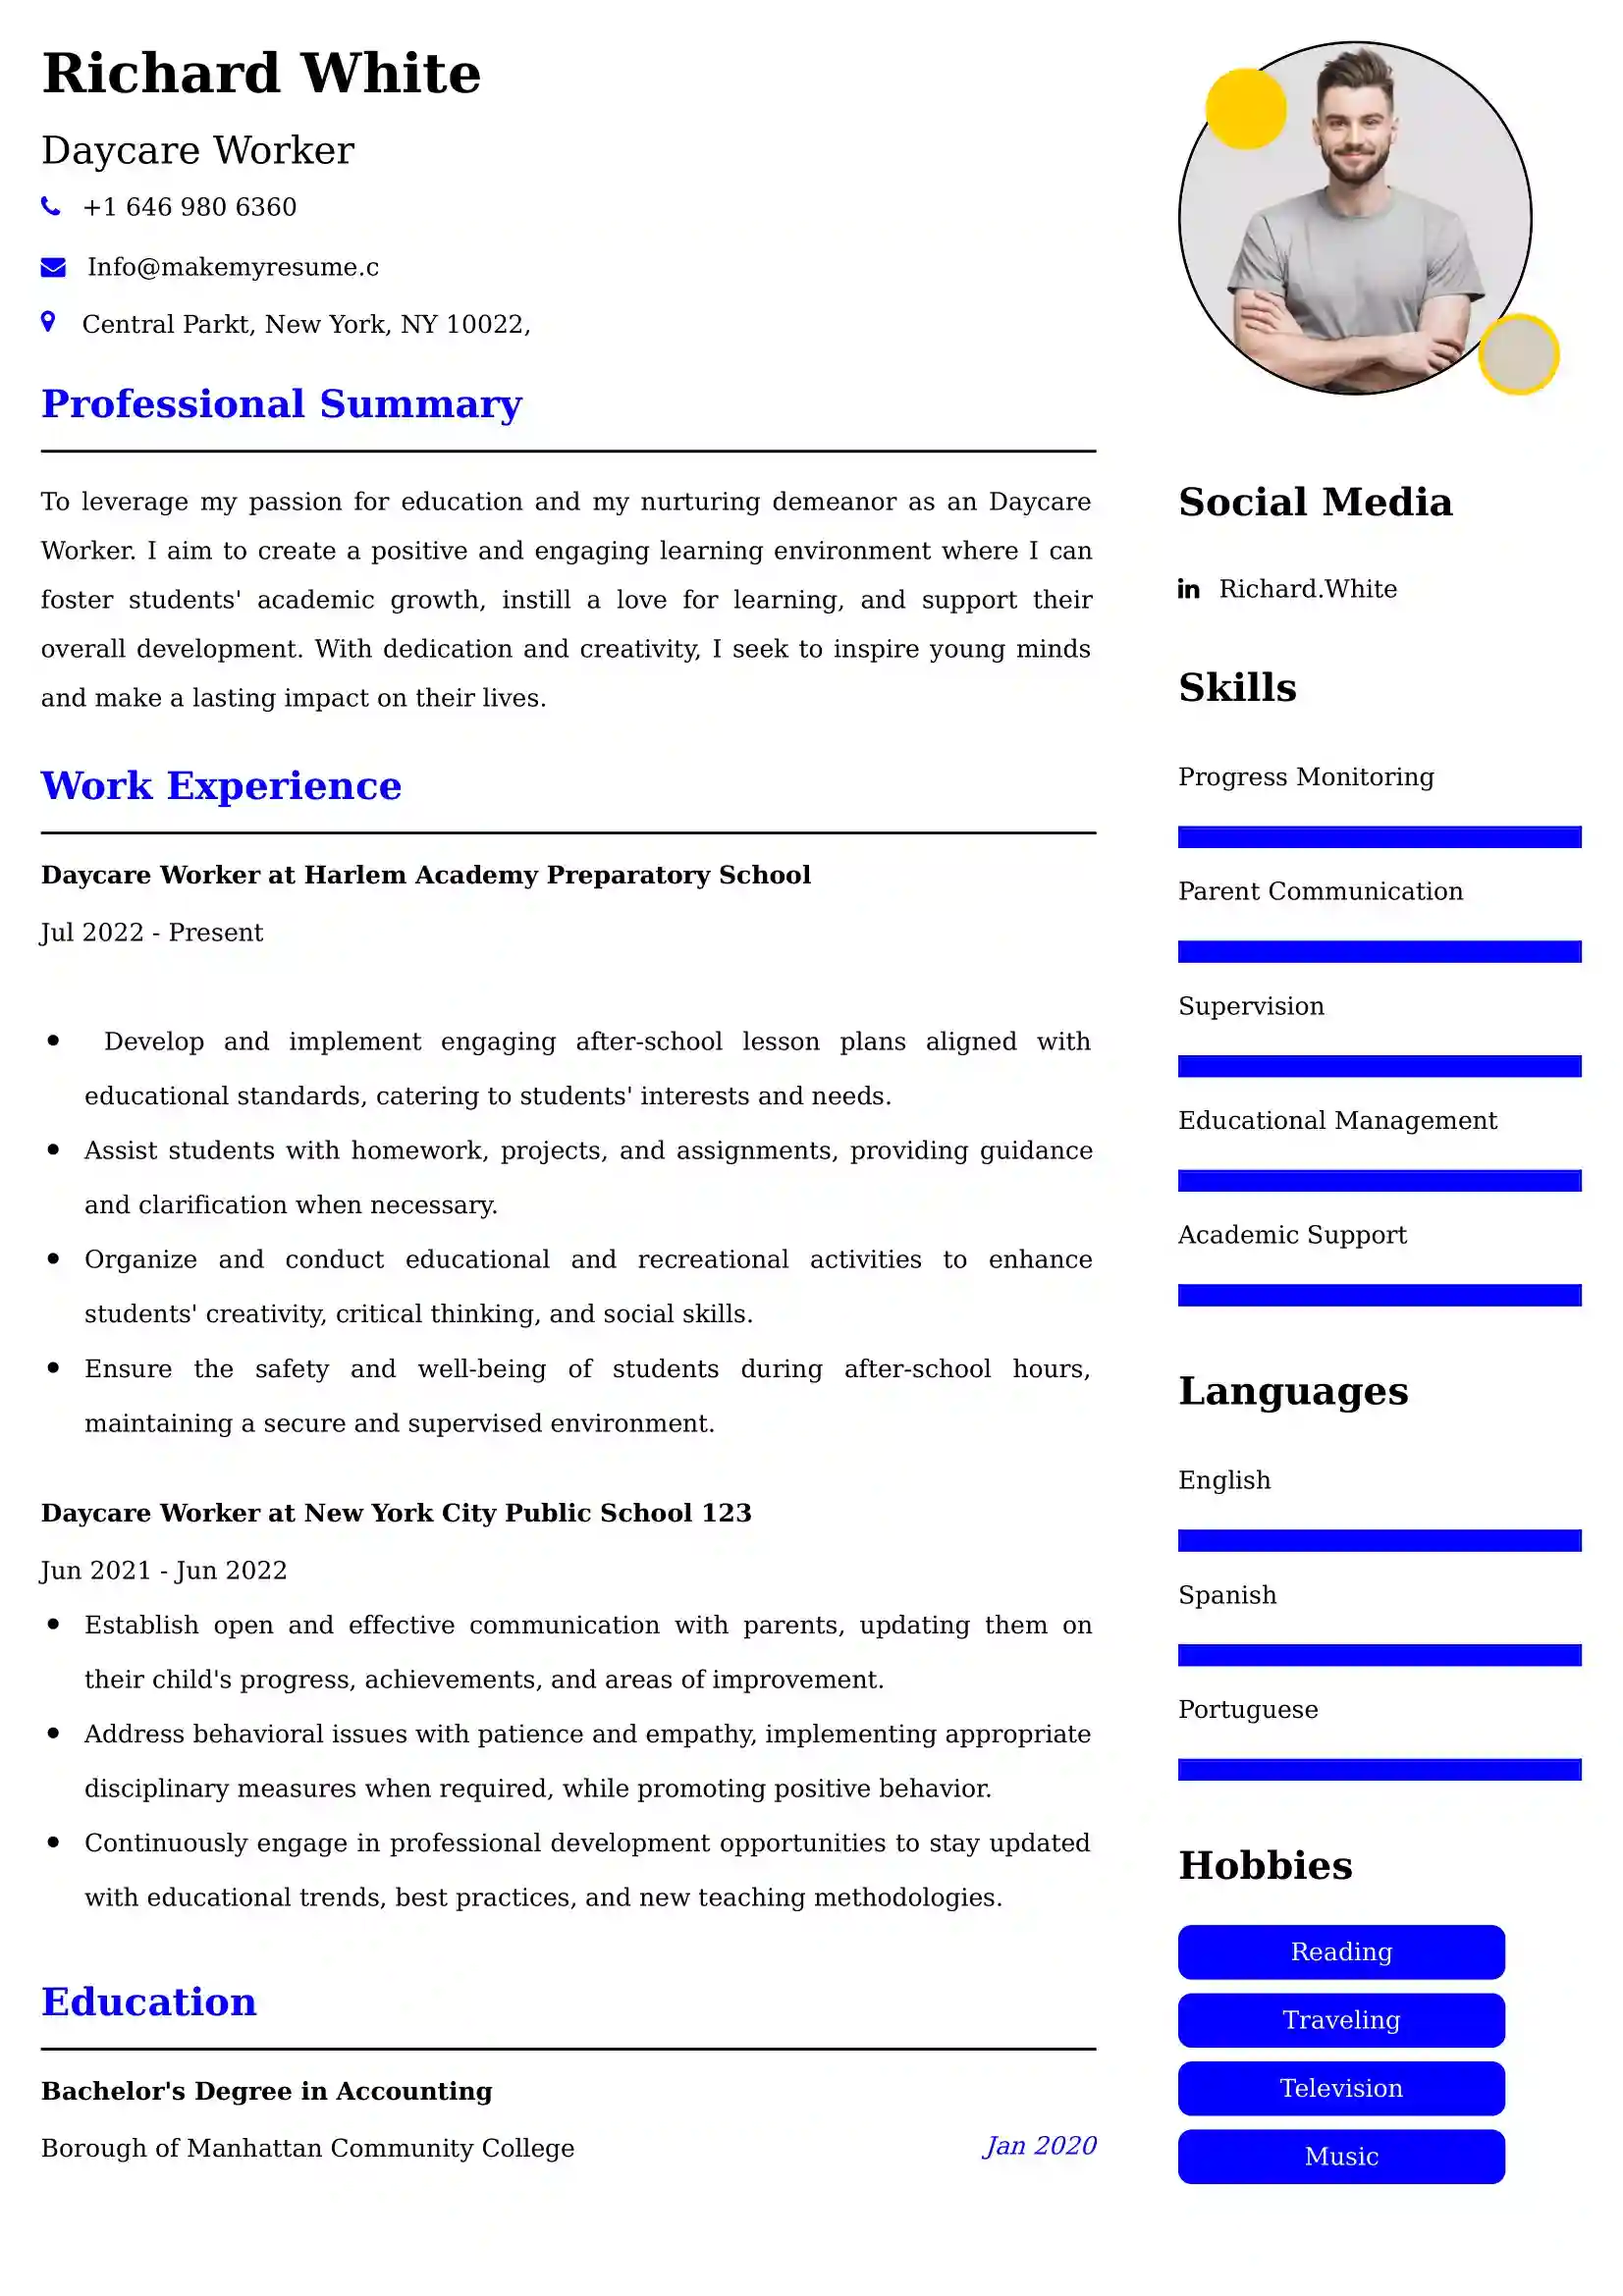 Daycare Worker Resume Examples - UK Format, Latest Template.